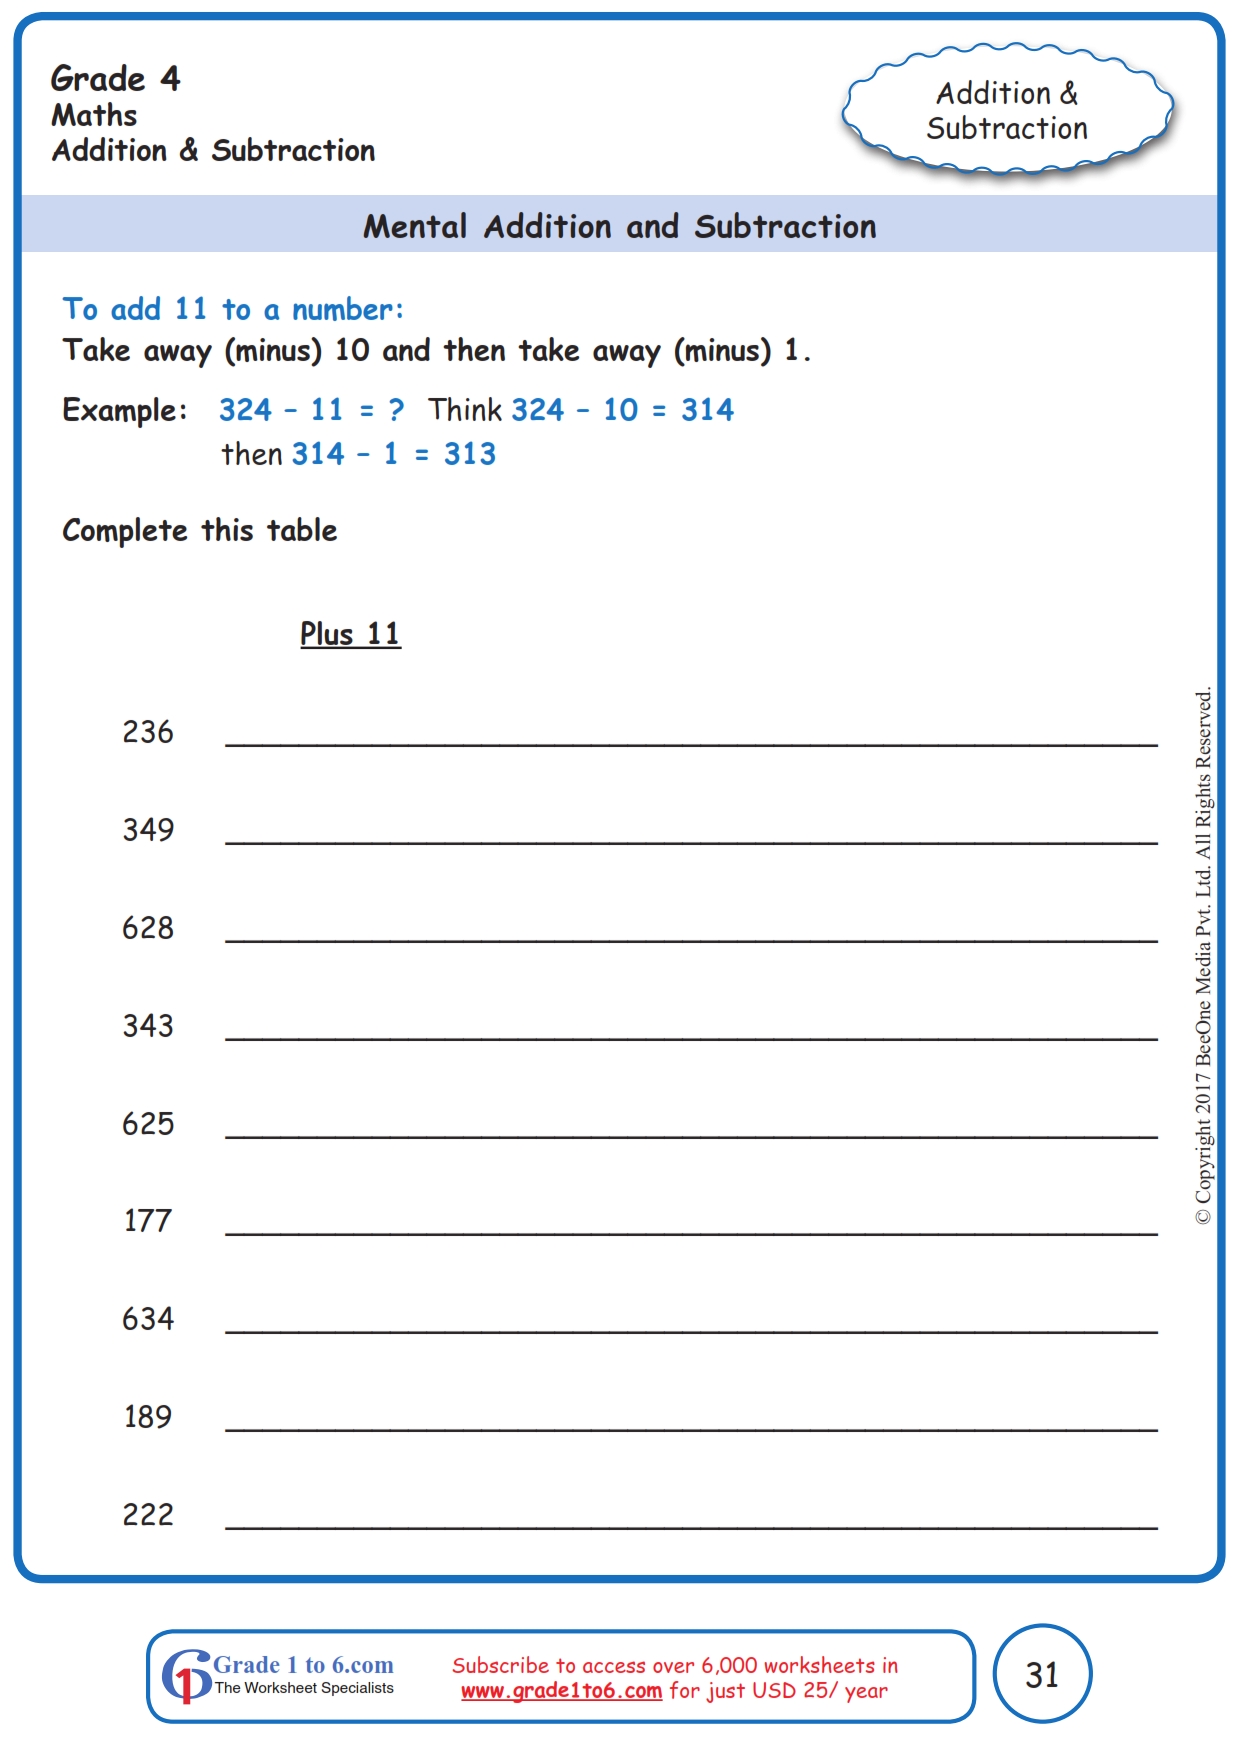 mental math addition subtraction worksheets www grade1to6 com